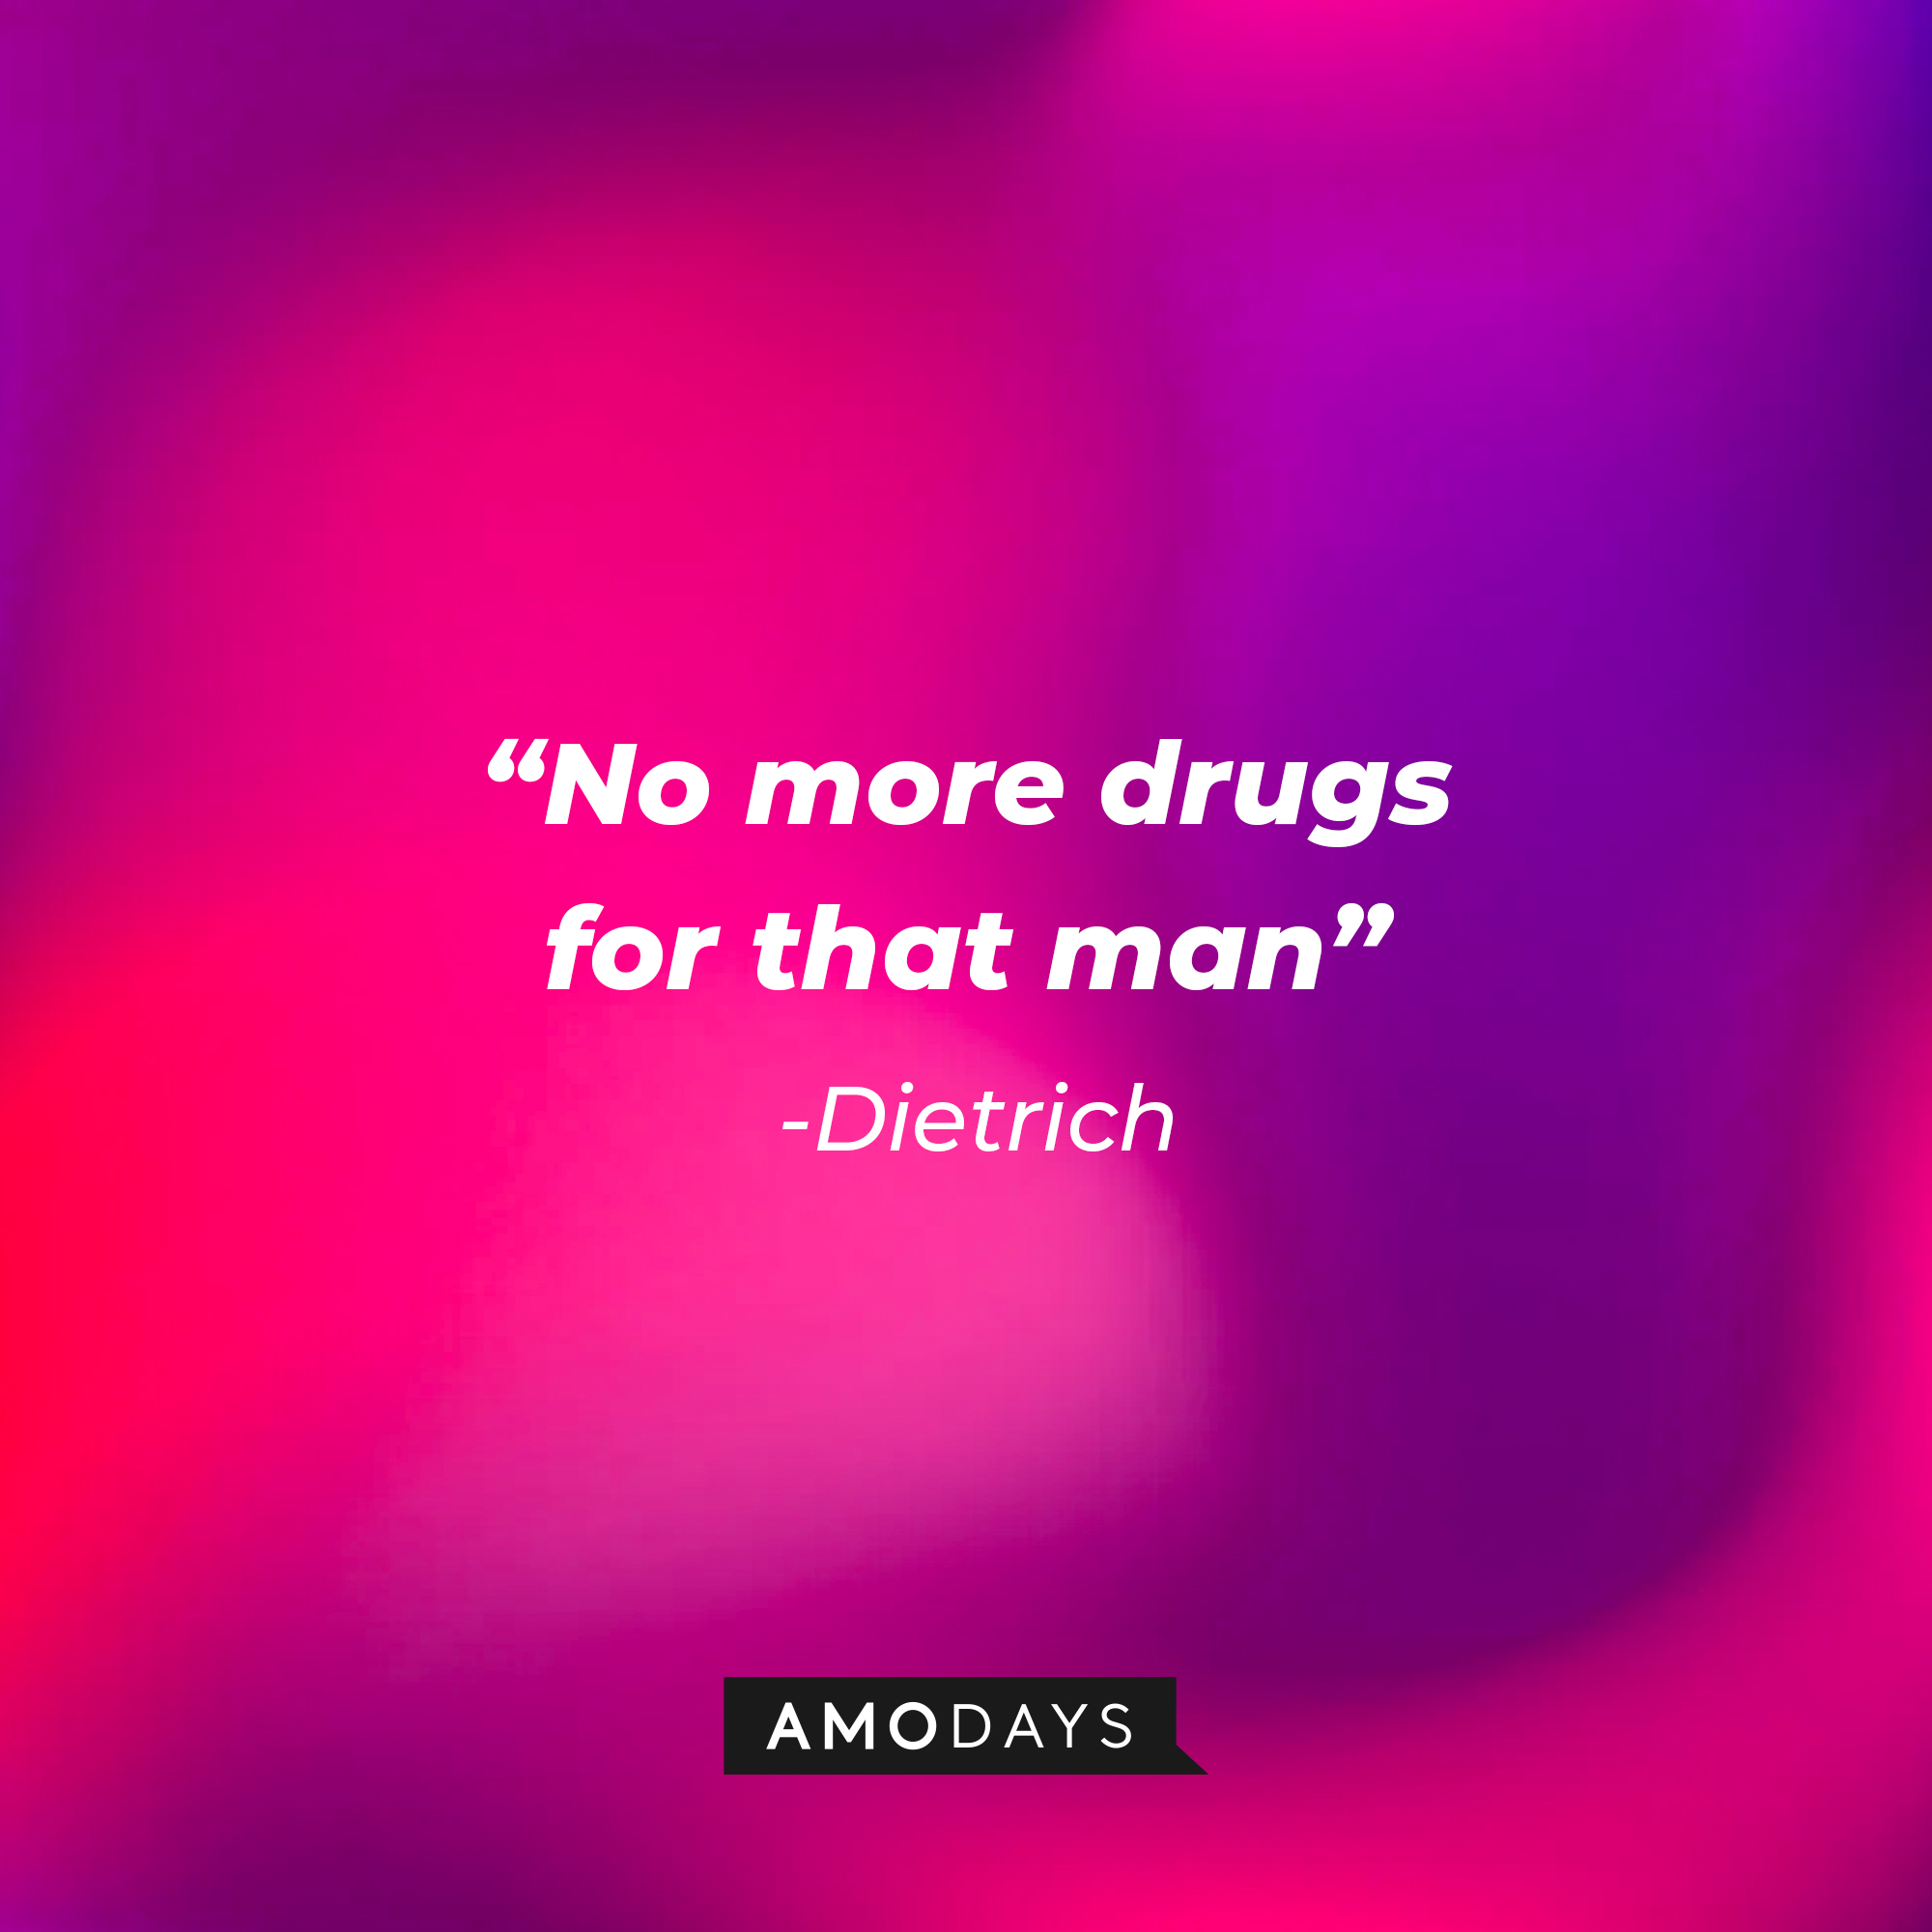 Dietrich's quote: "No more drugs for that man” : Source: Amodays